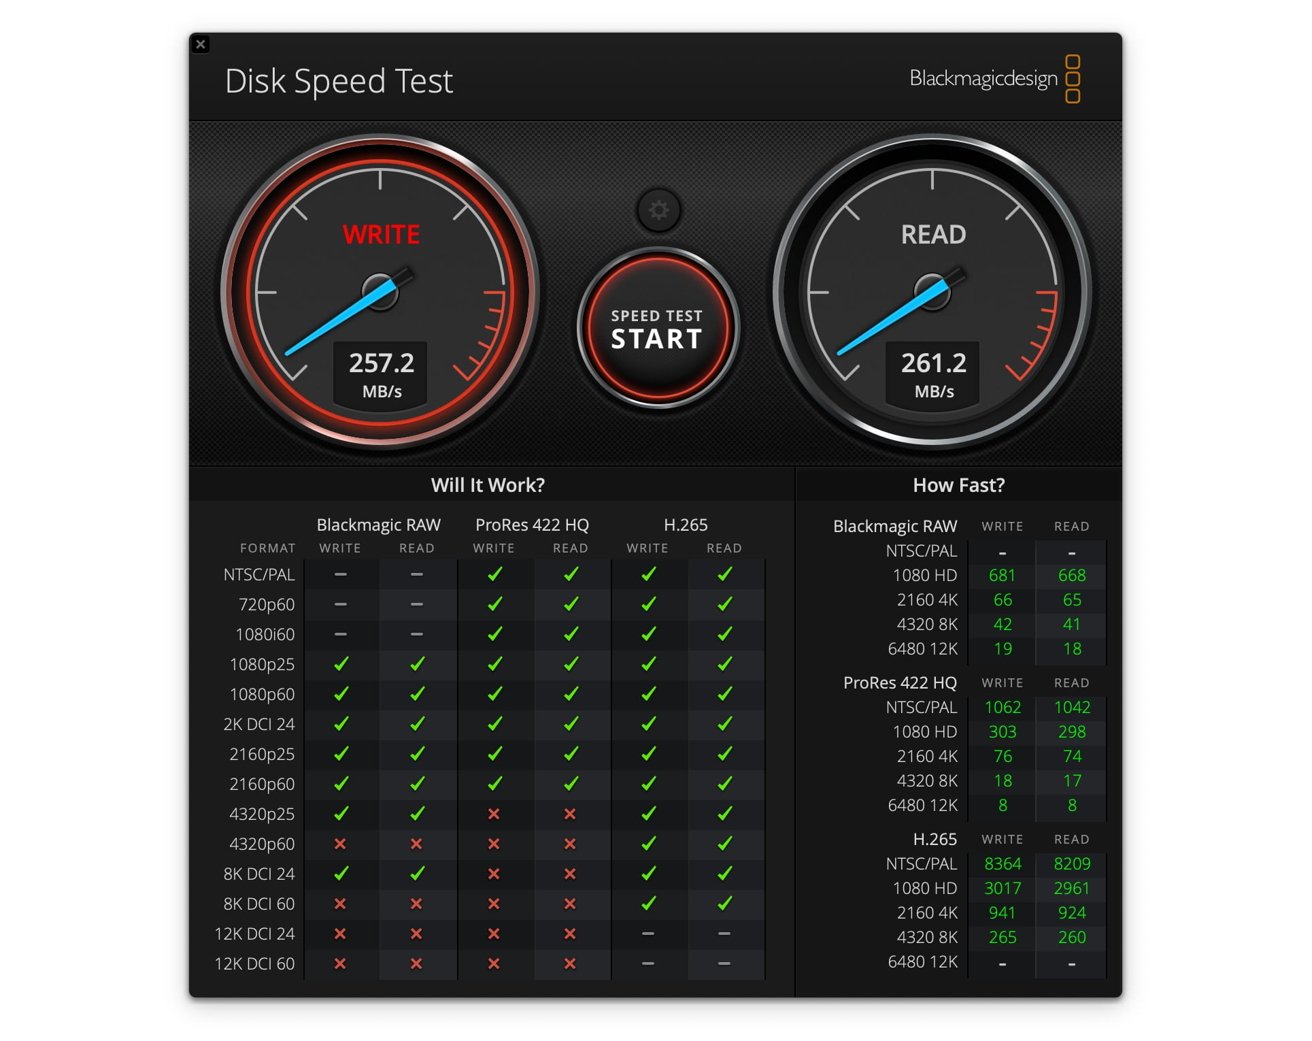 The Disk Speed Test of the 22TB SanDisk Professional G-Drive